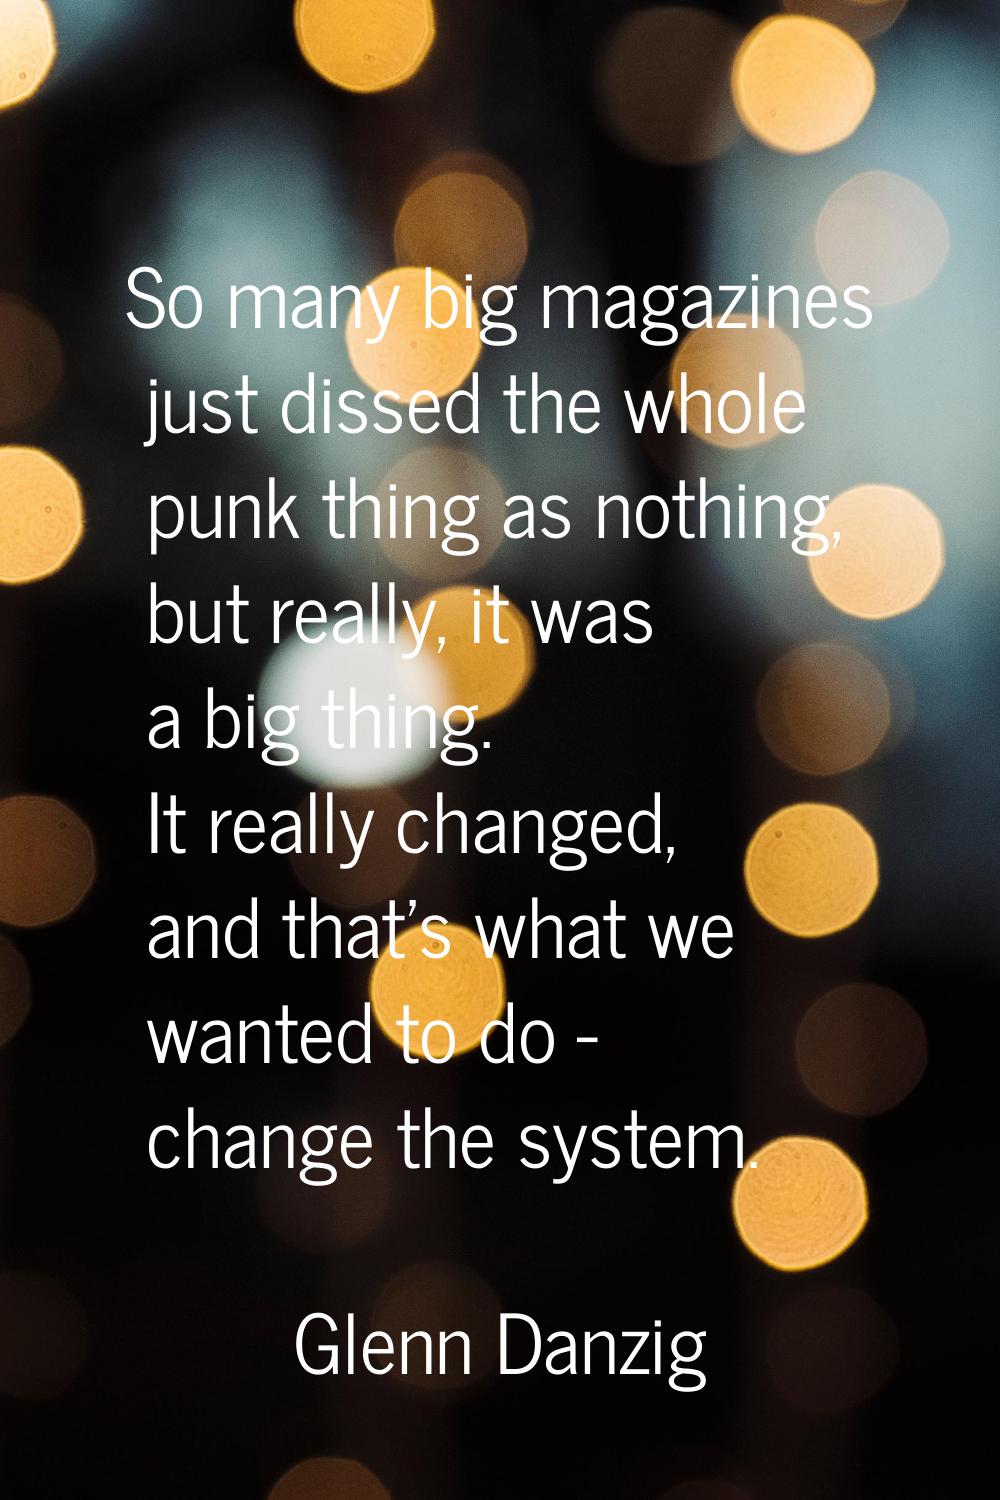 So many big magazines just dissed the whole punk thing as nothing, but really, it was a big thing. 